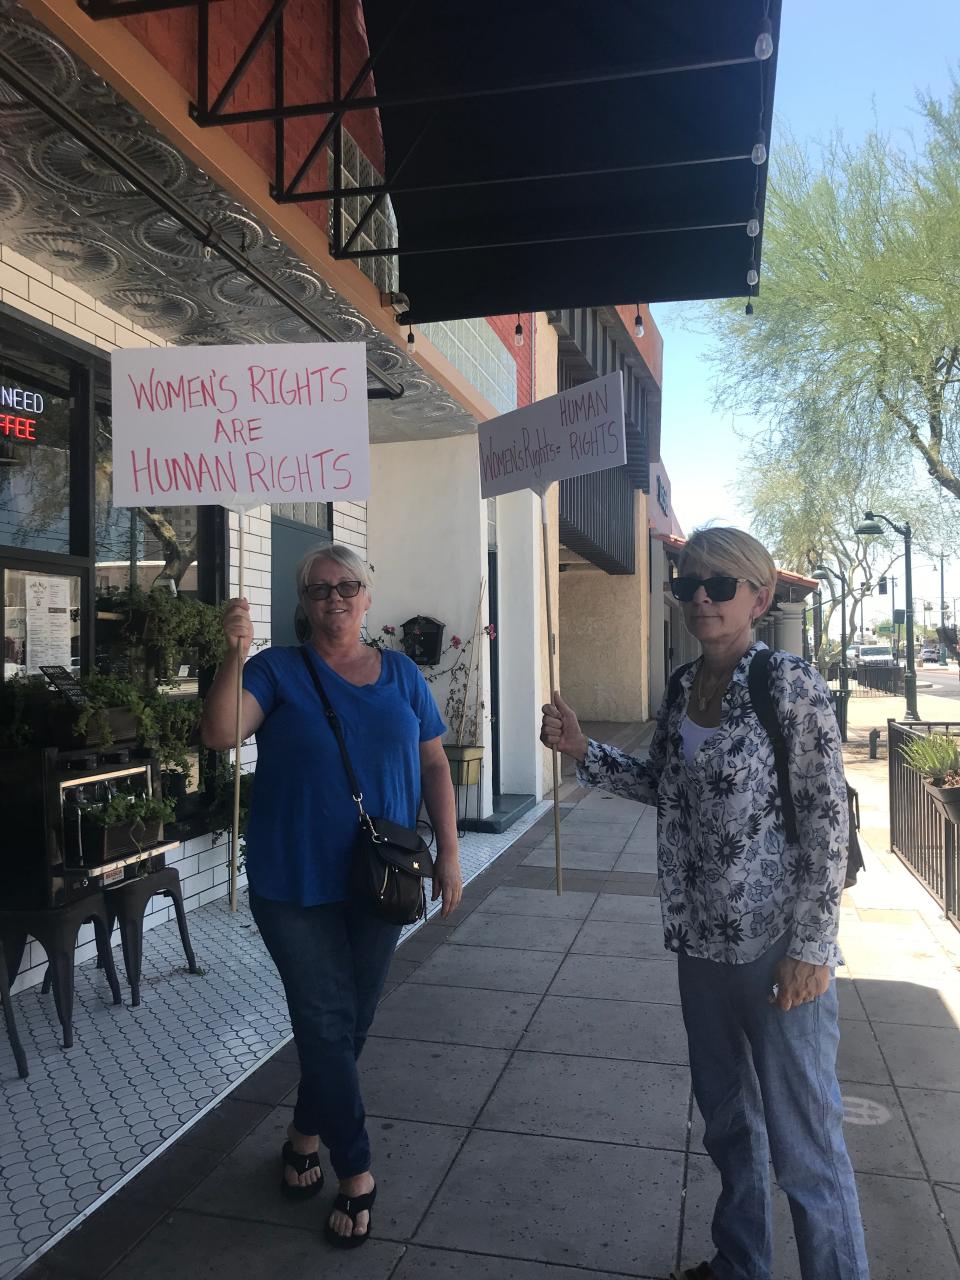 Anisa Gracanin (left) and Judy Drayer (right) walk the streets of downtown Mesa to protest the U.S. Supreme Court ruling on Roe v. Wade.